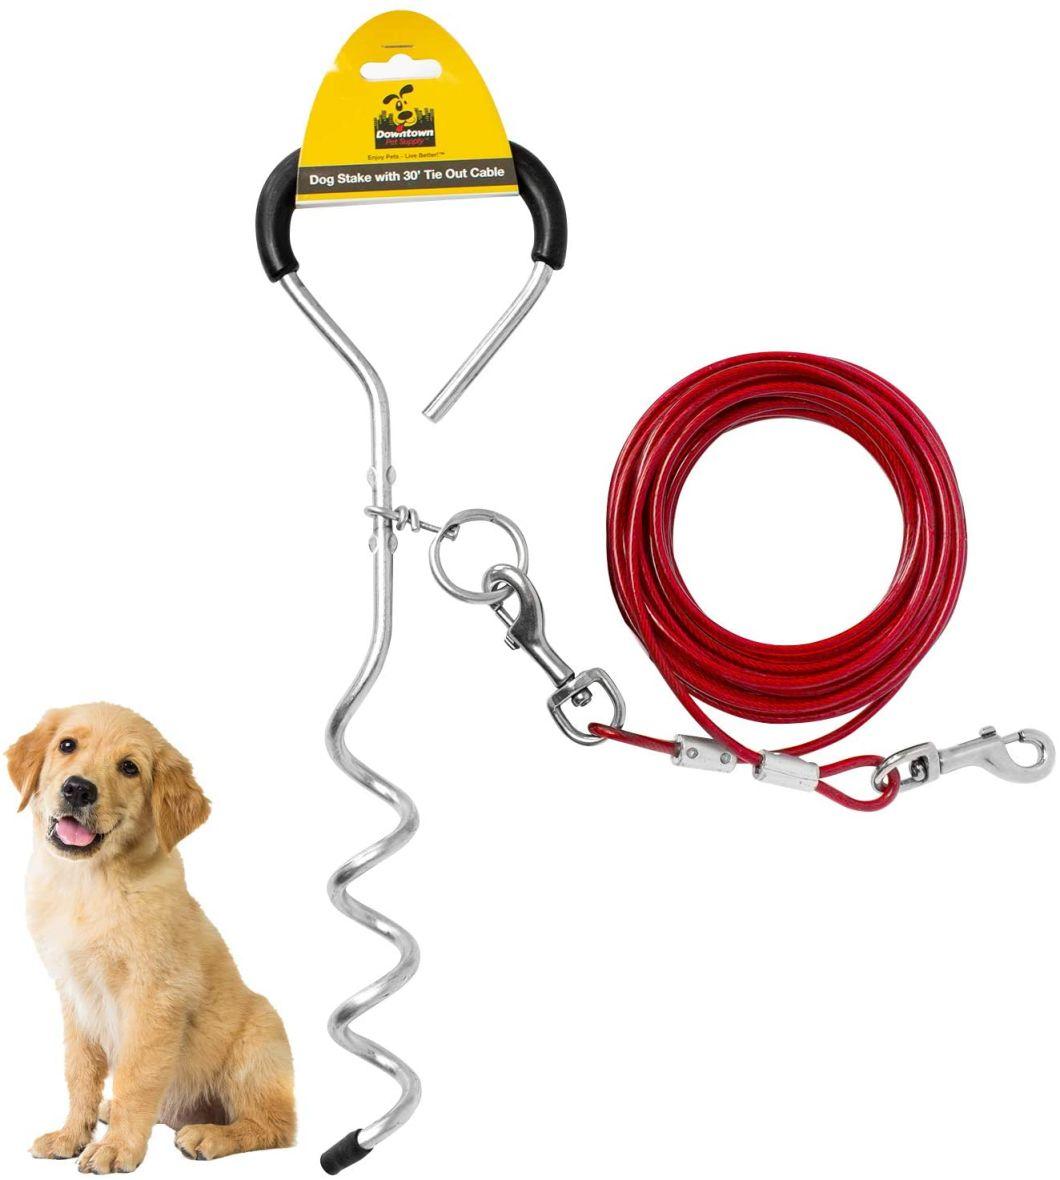 Dog Products, Updated Version Easily Visible Reflective Stripe Resist Rust Dog Leash Dog Tie-out Cable